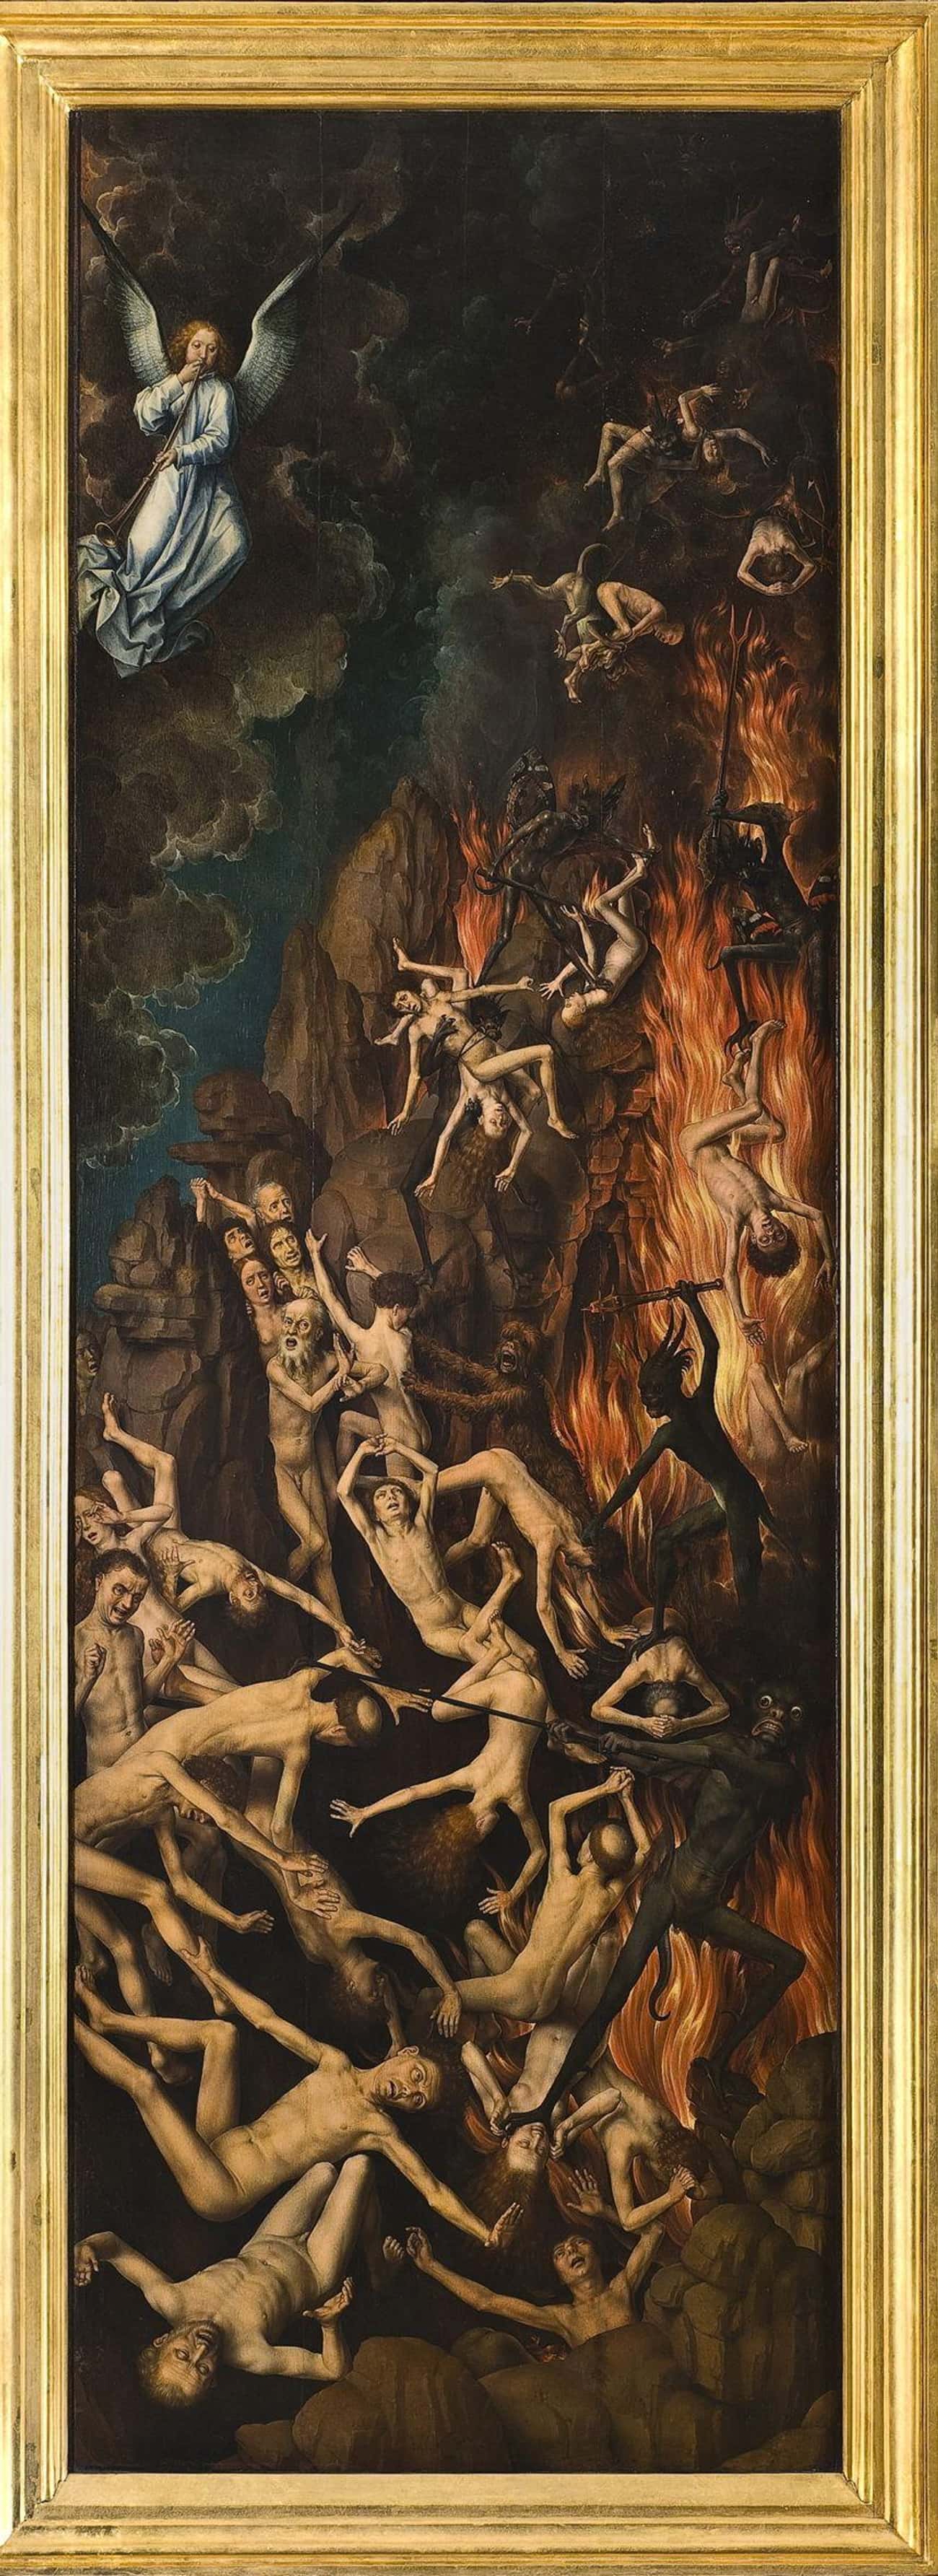 Casting The Damned Into Hell  — Hans Memling, c. 1467-1471